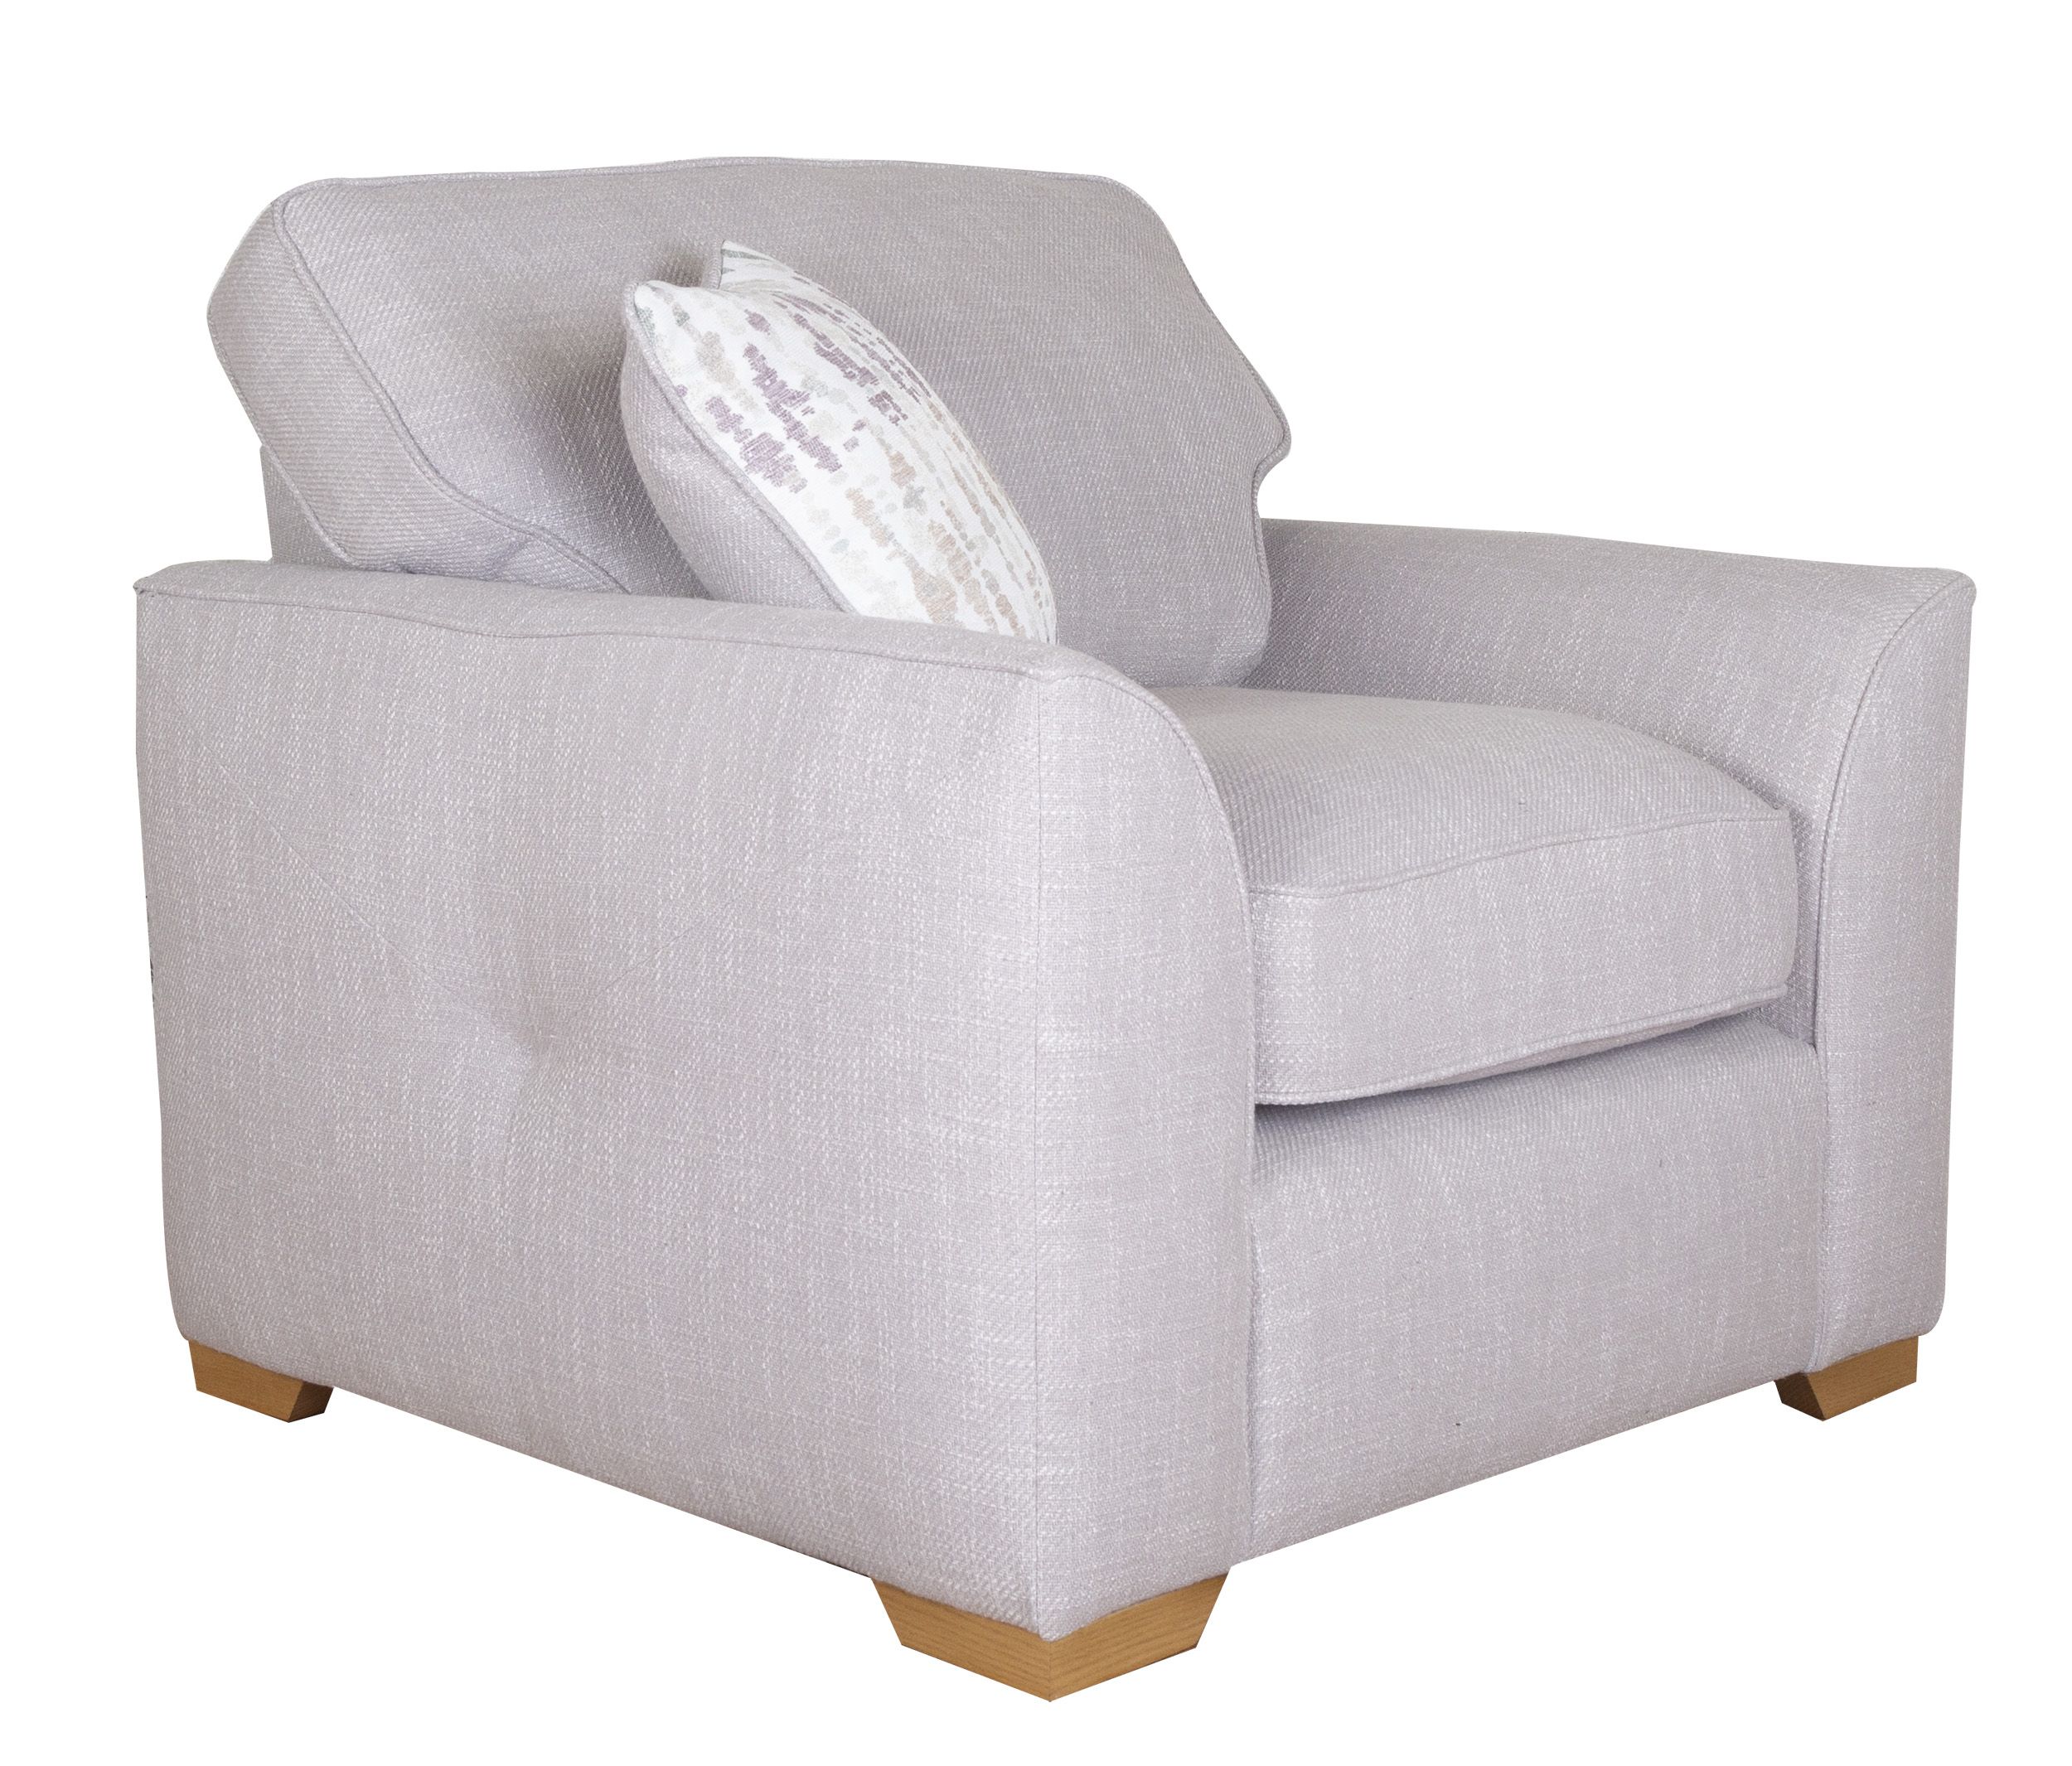 Rooms For All – Emily Arm Chair Regarding Selby Armchairs (View 14 of 15)